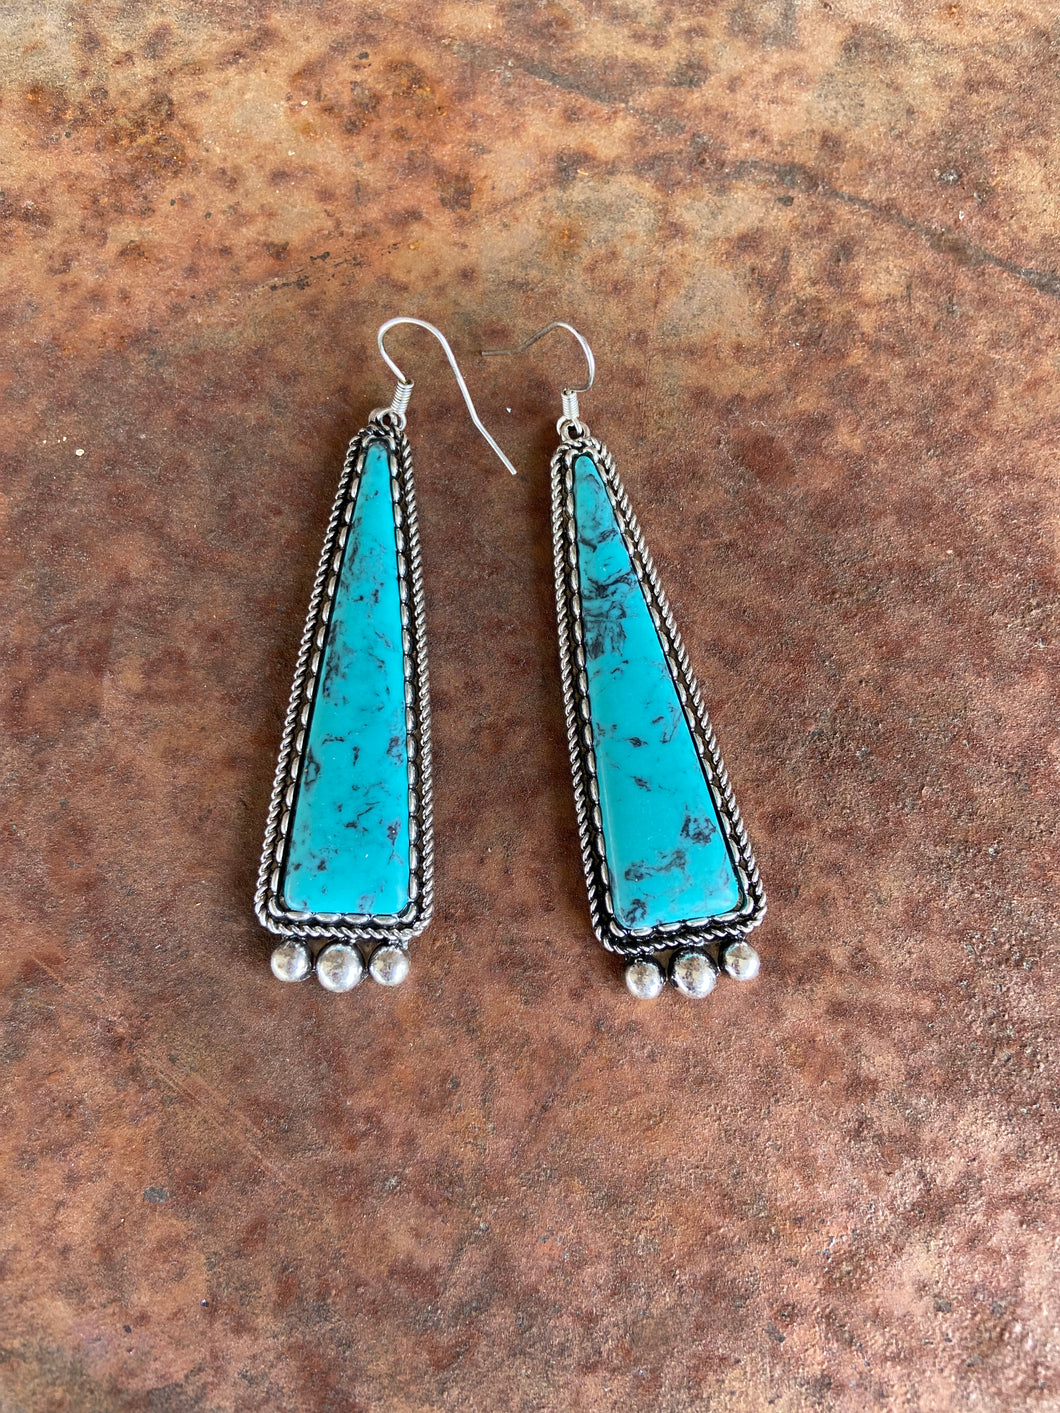 THE TURQUOISE LINEAR TRIANGLE EARRINGS